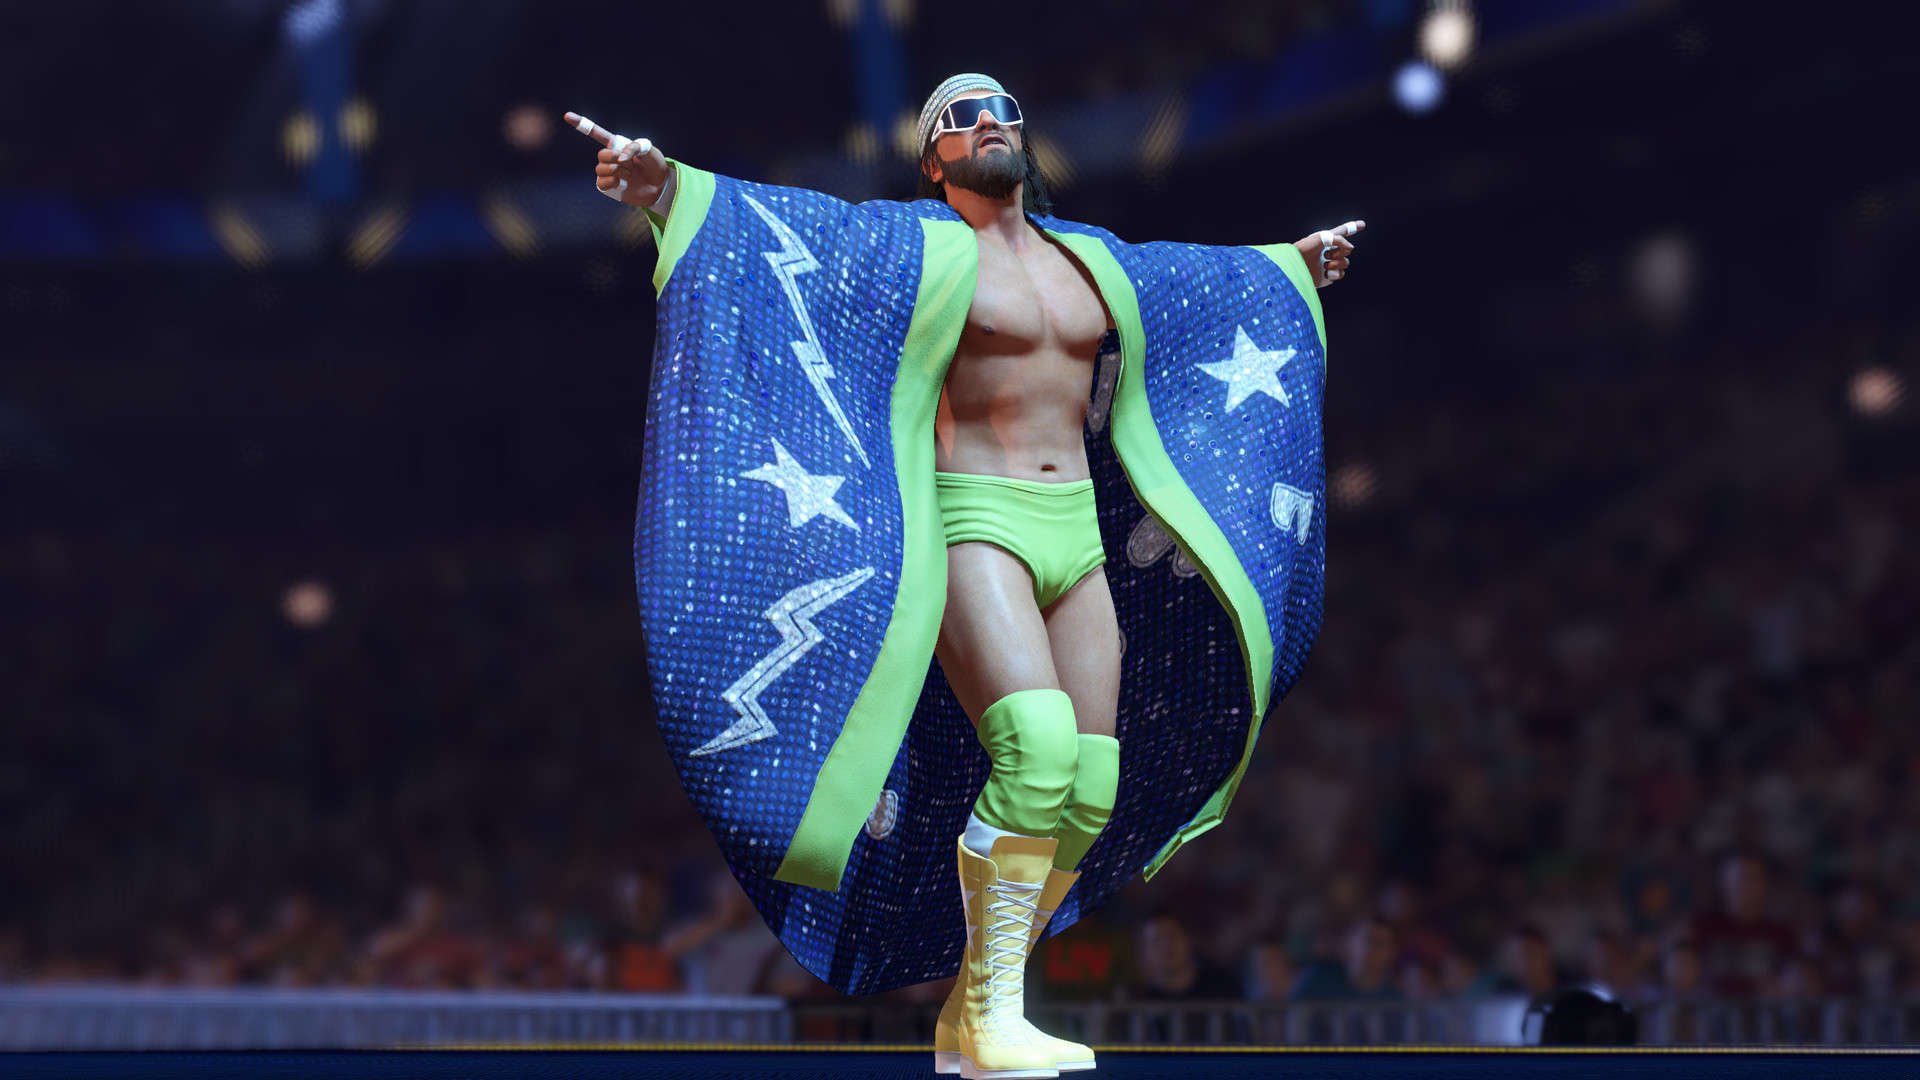 A wrestler cheering for the crowd in WWE 2K22.